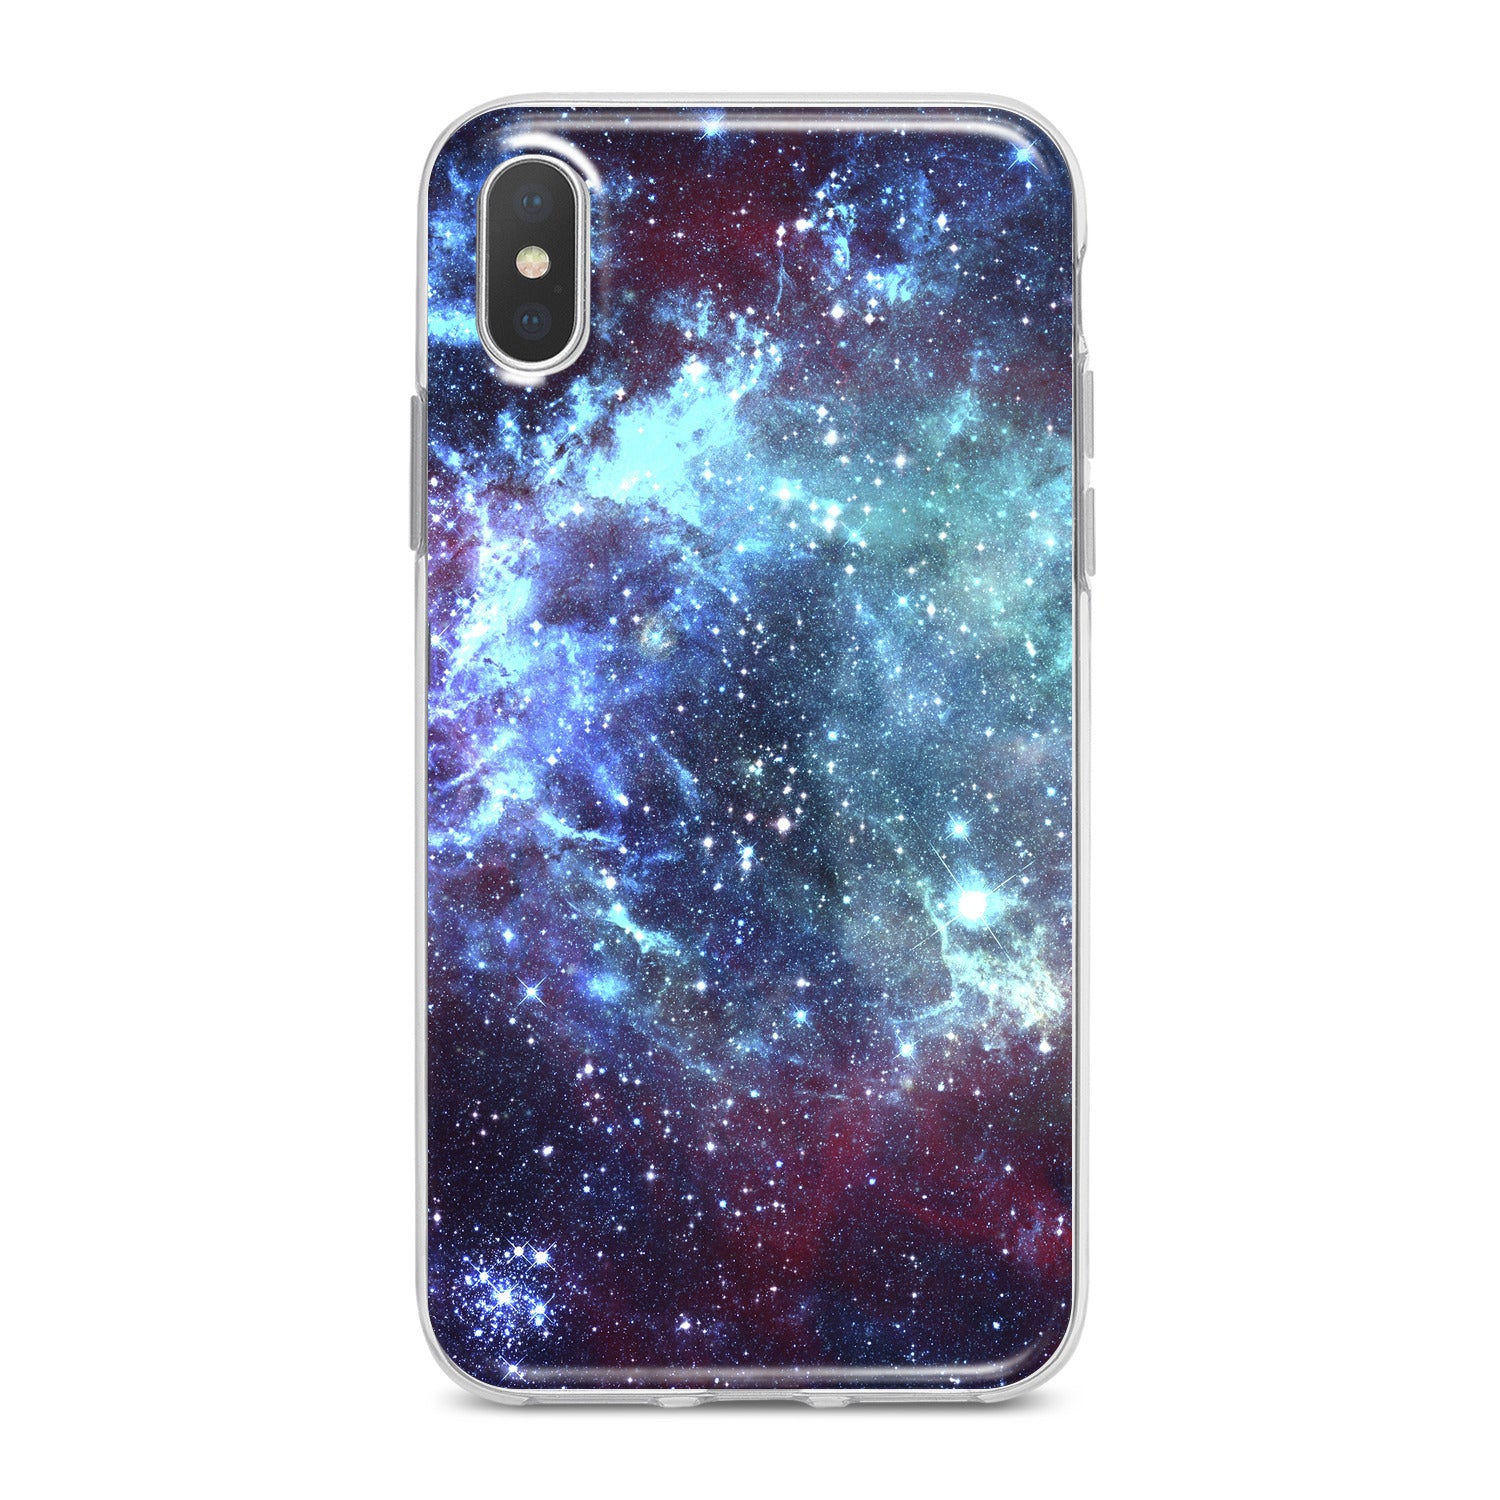 Lex Altern Galaxy Abstract Theme Phone Case for your iPhone & Android phone.